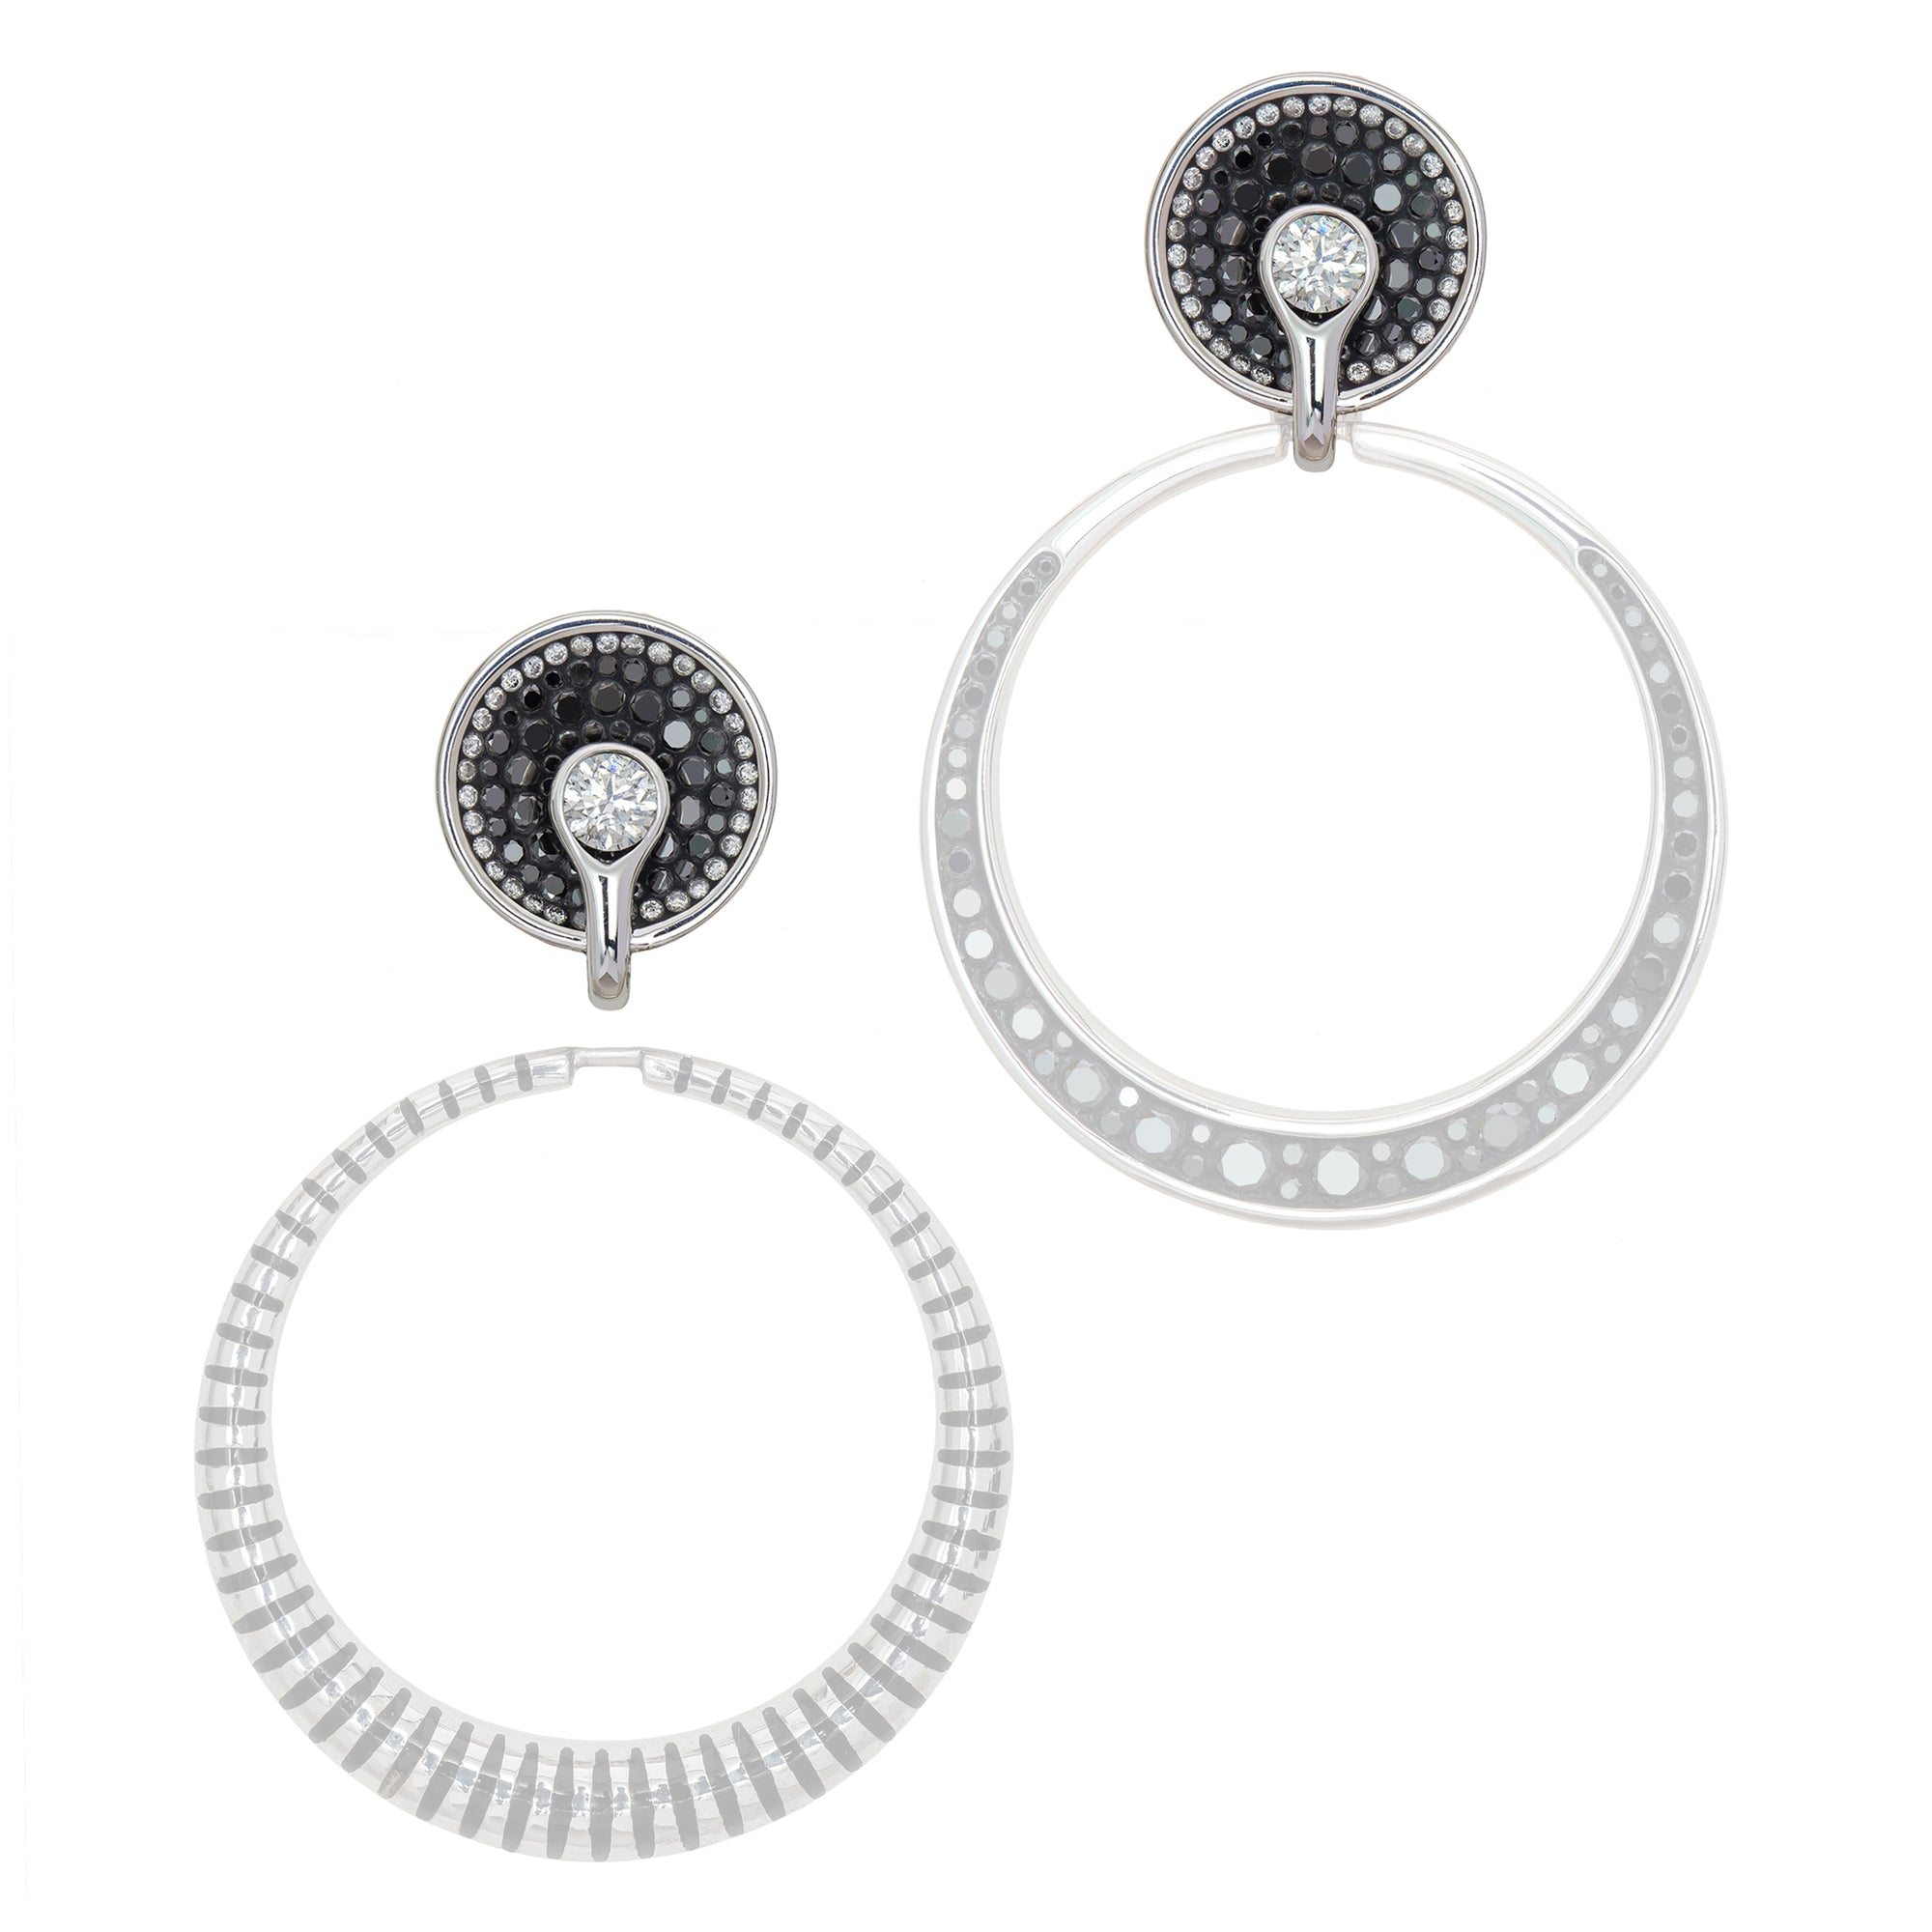 Border Black Opus Stud Earrings by Pleve available at Talisman Collection Fine Jewelers in El Dorado Hills, CA and online. Specs: 1.35 cttw white & color enhanced diamonds, 18k white gold, 12mm studs. Pair with Pleve's Border Black Opus Hoop Enhancer Earrings for  a truly stunning statement. 